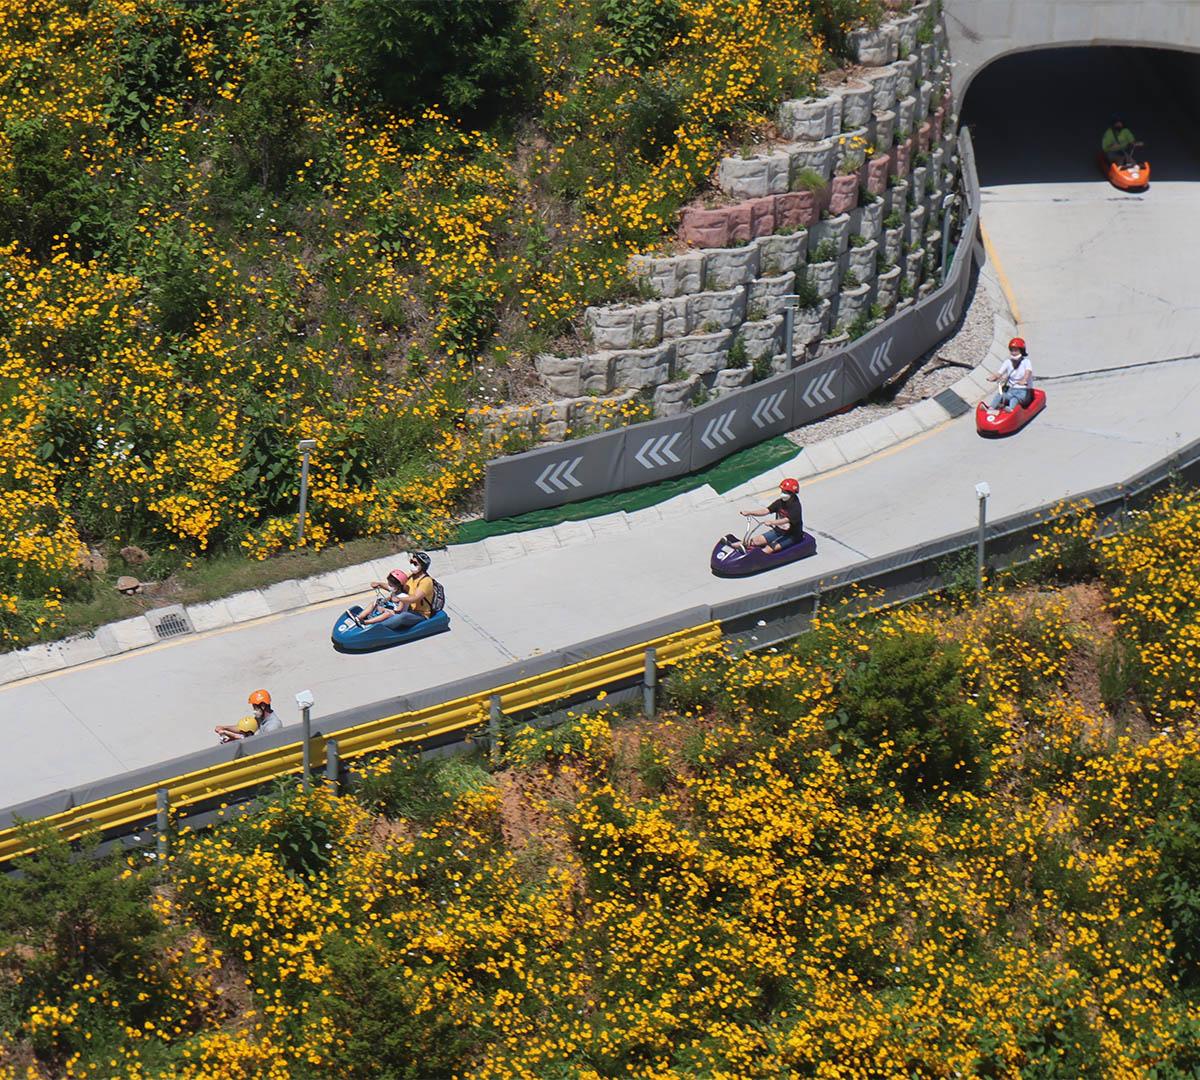 Incheon Luge + Yeongjong Rail Bike + Spring Flower One Day Tour (Departing from Seoul)